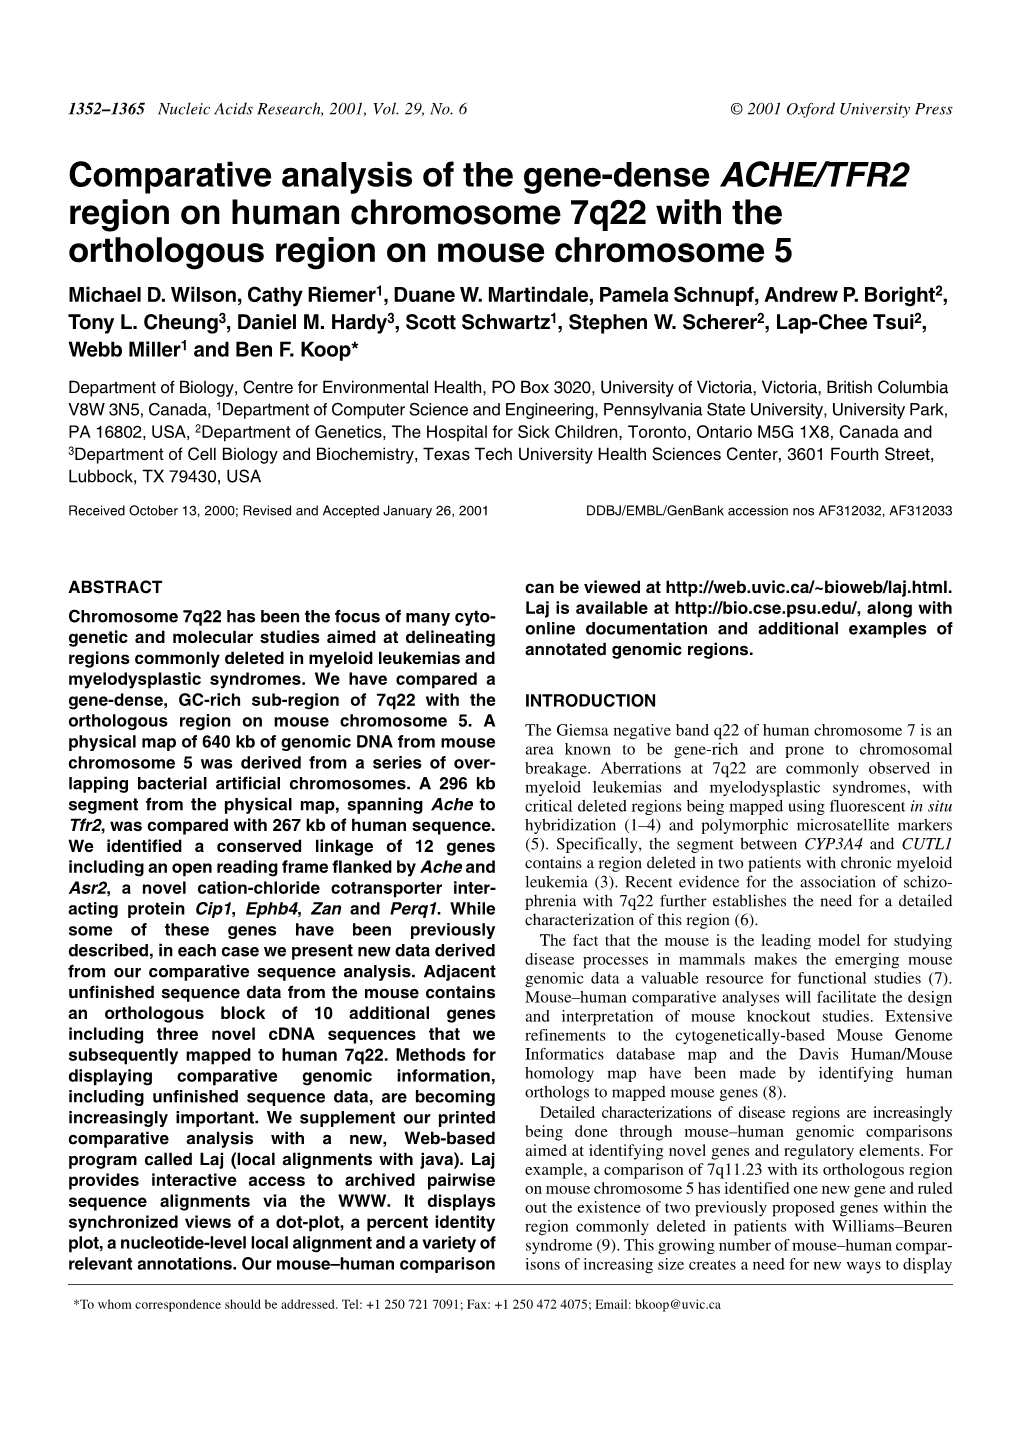 Comparative Analysis of the Gene-Dense ACHE/TFR2 Region on Human Chromosome 7Q22 with the Orthologous Region on Mouse Chromosome 5 Michael D